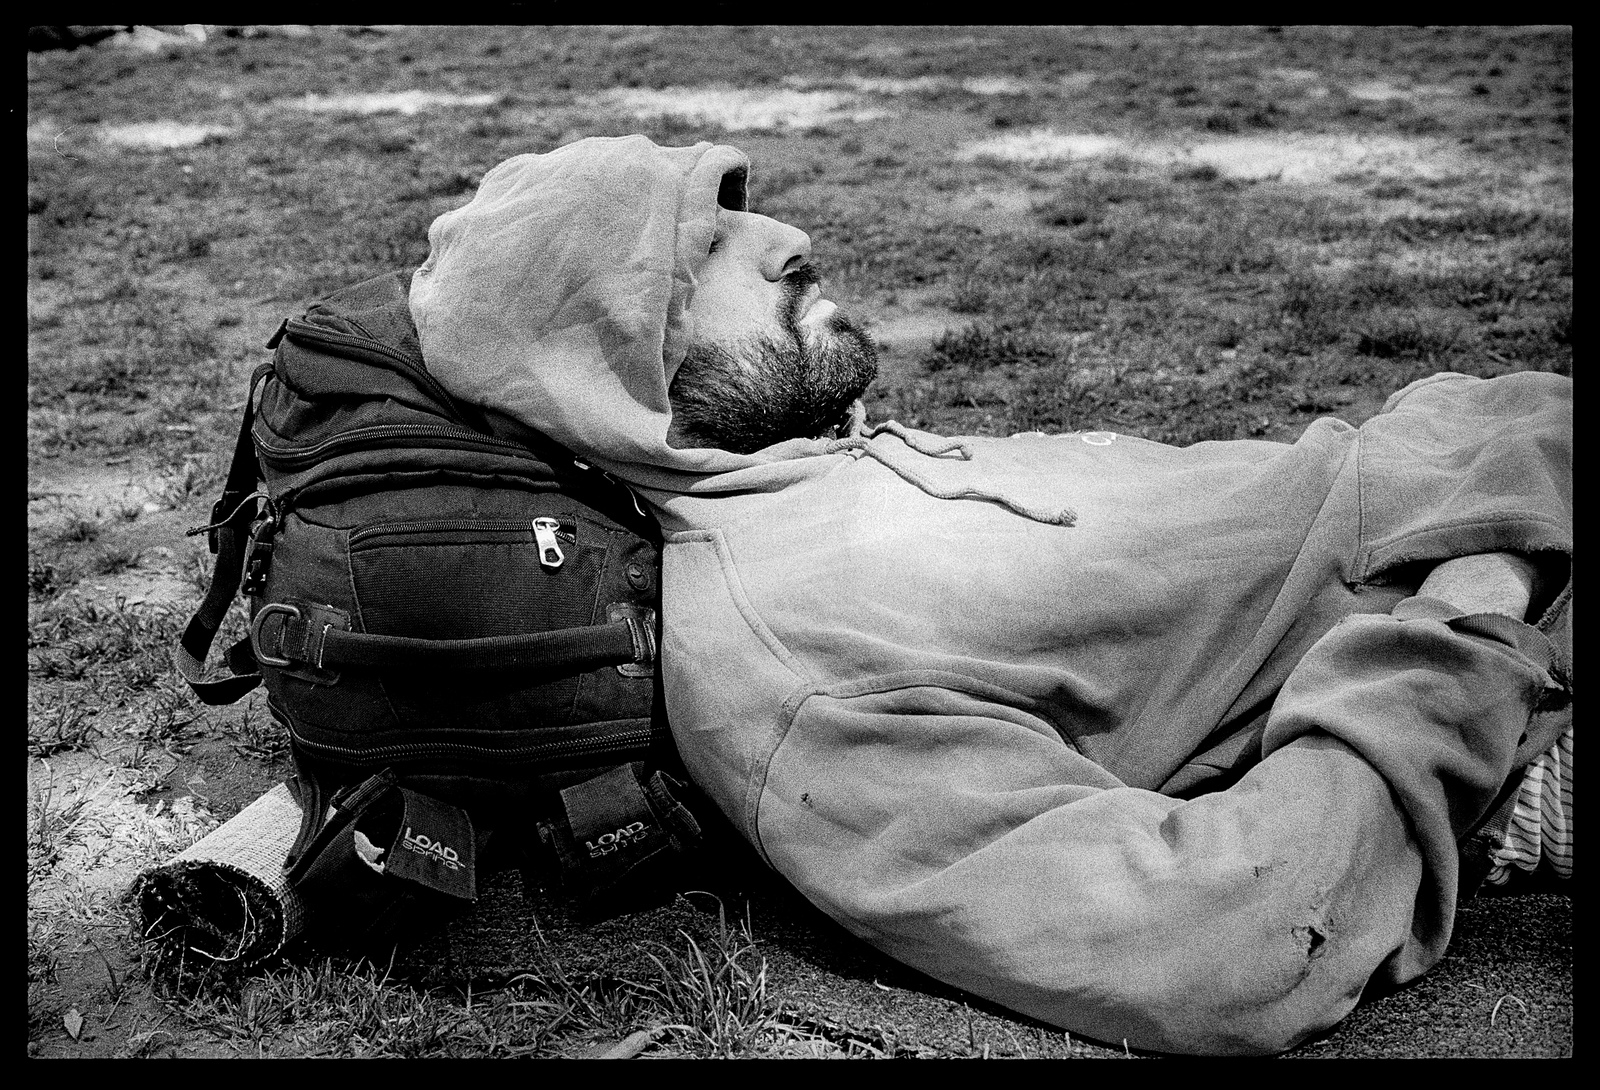 Image description: A young man with a scruffy beard sleeps on the grass in dappled sunlight. His hood is drawn partly over his head and his hands are in the pockets of his hoodie. His head rests on a backpack.